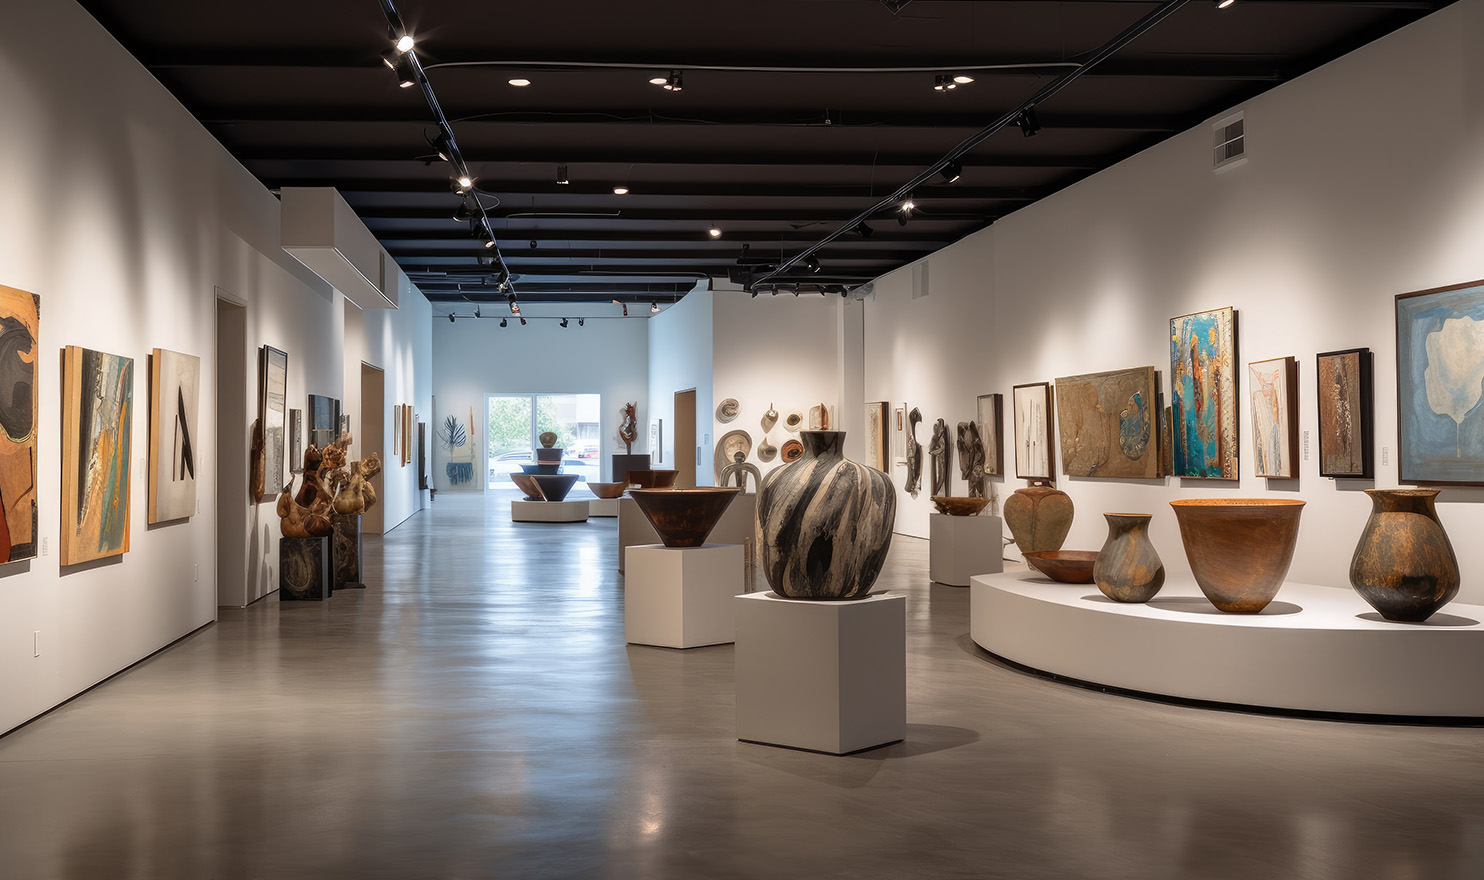 A wide angle shot of a gallery exhibit filled with handmade pottery, paintings, photographs, and other types of artwork on display.